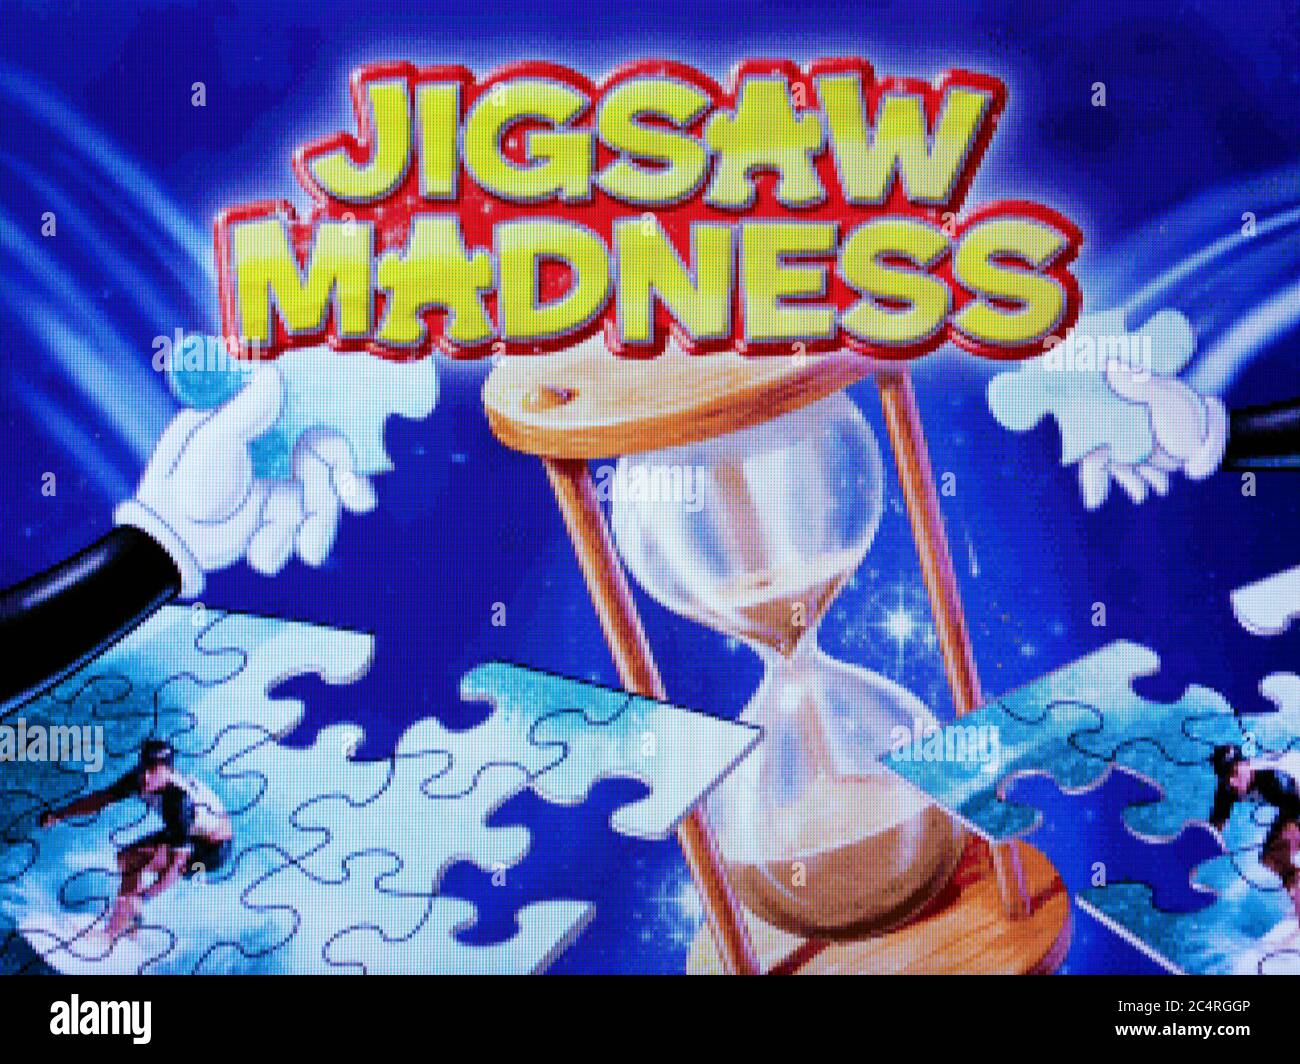 https://c8.alamy.com/comp/2C4RGGP/jigsaw-madness-sony-playstation-1-ps1-psx-editorial-use-only-2C4RGGP.jpg